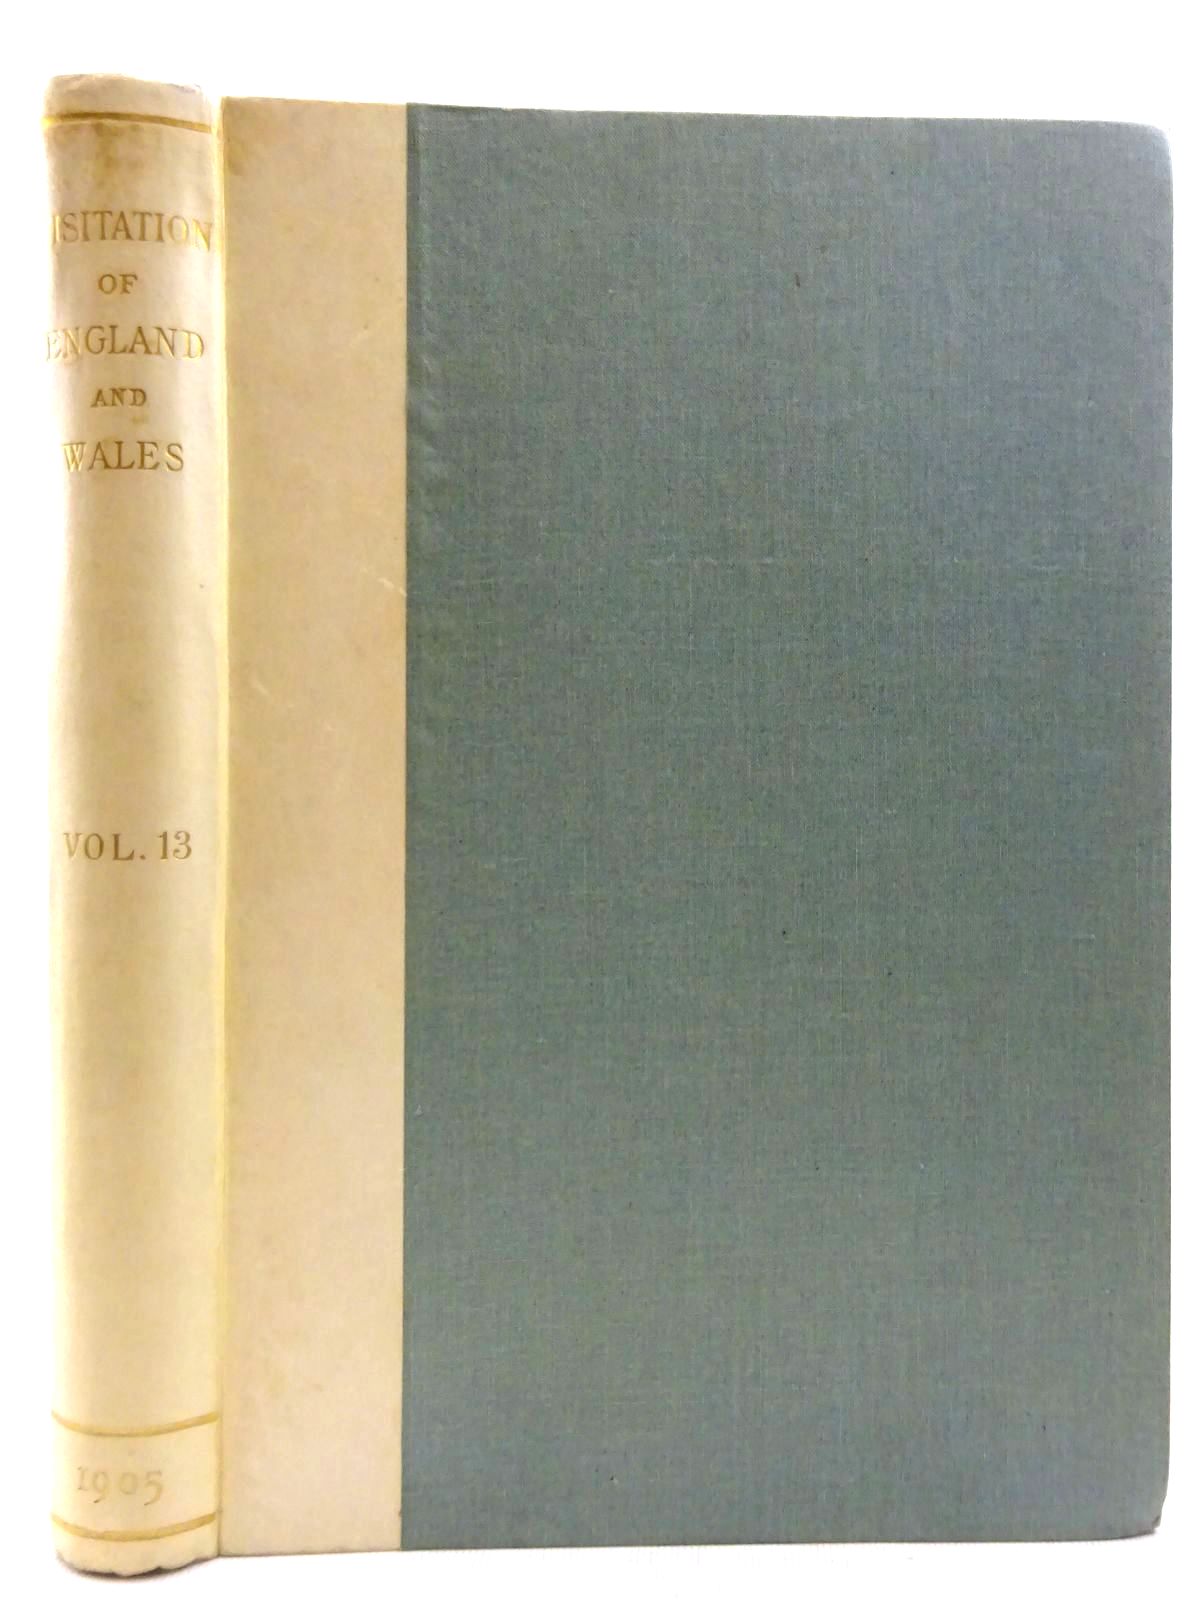 Photo of VISITATION OF ENGLAND AND WALES VOLUME 13 written by Crisp, Frederick Arthur (STOCK CODE: 2128664)  for sale by Stella & Rose's Books